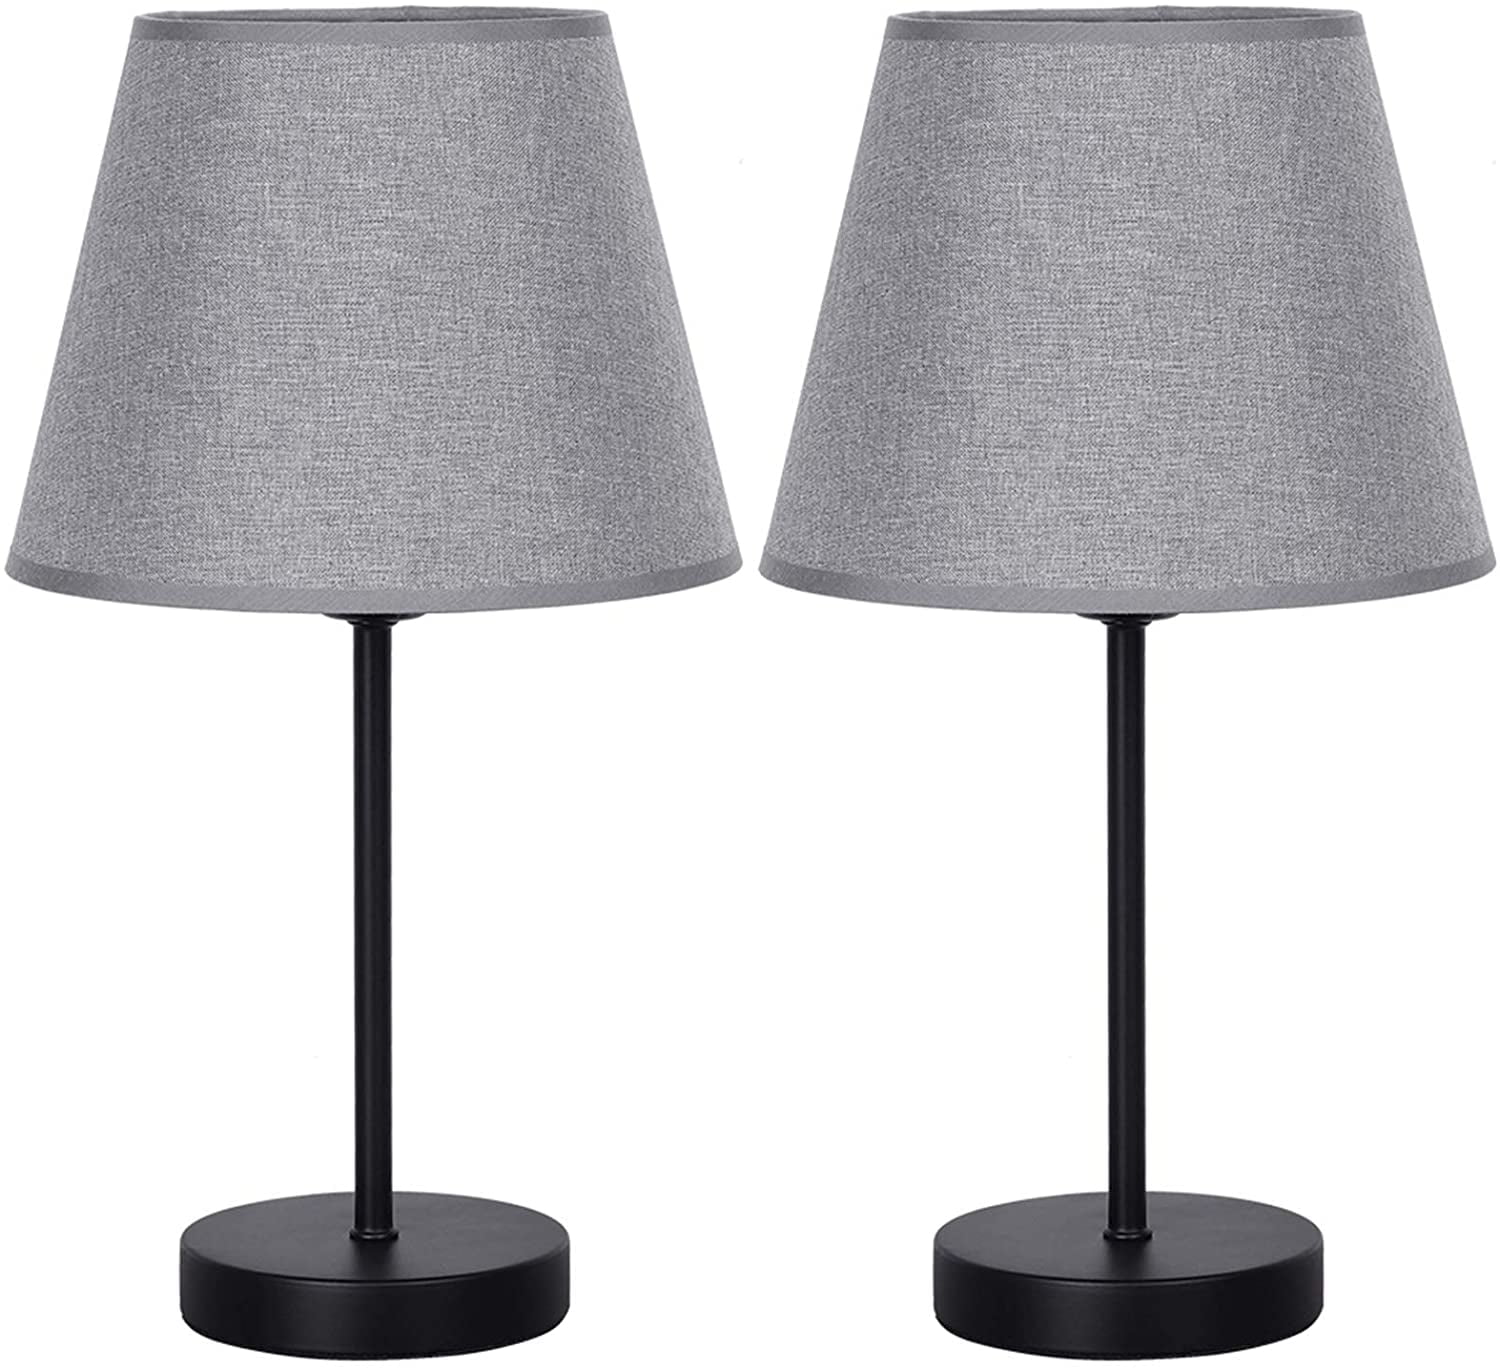 Black Small Table Lamps Vintage, Small Antique Table Lamp Shade